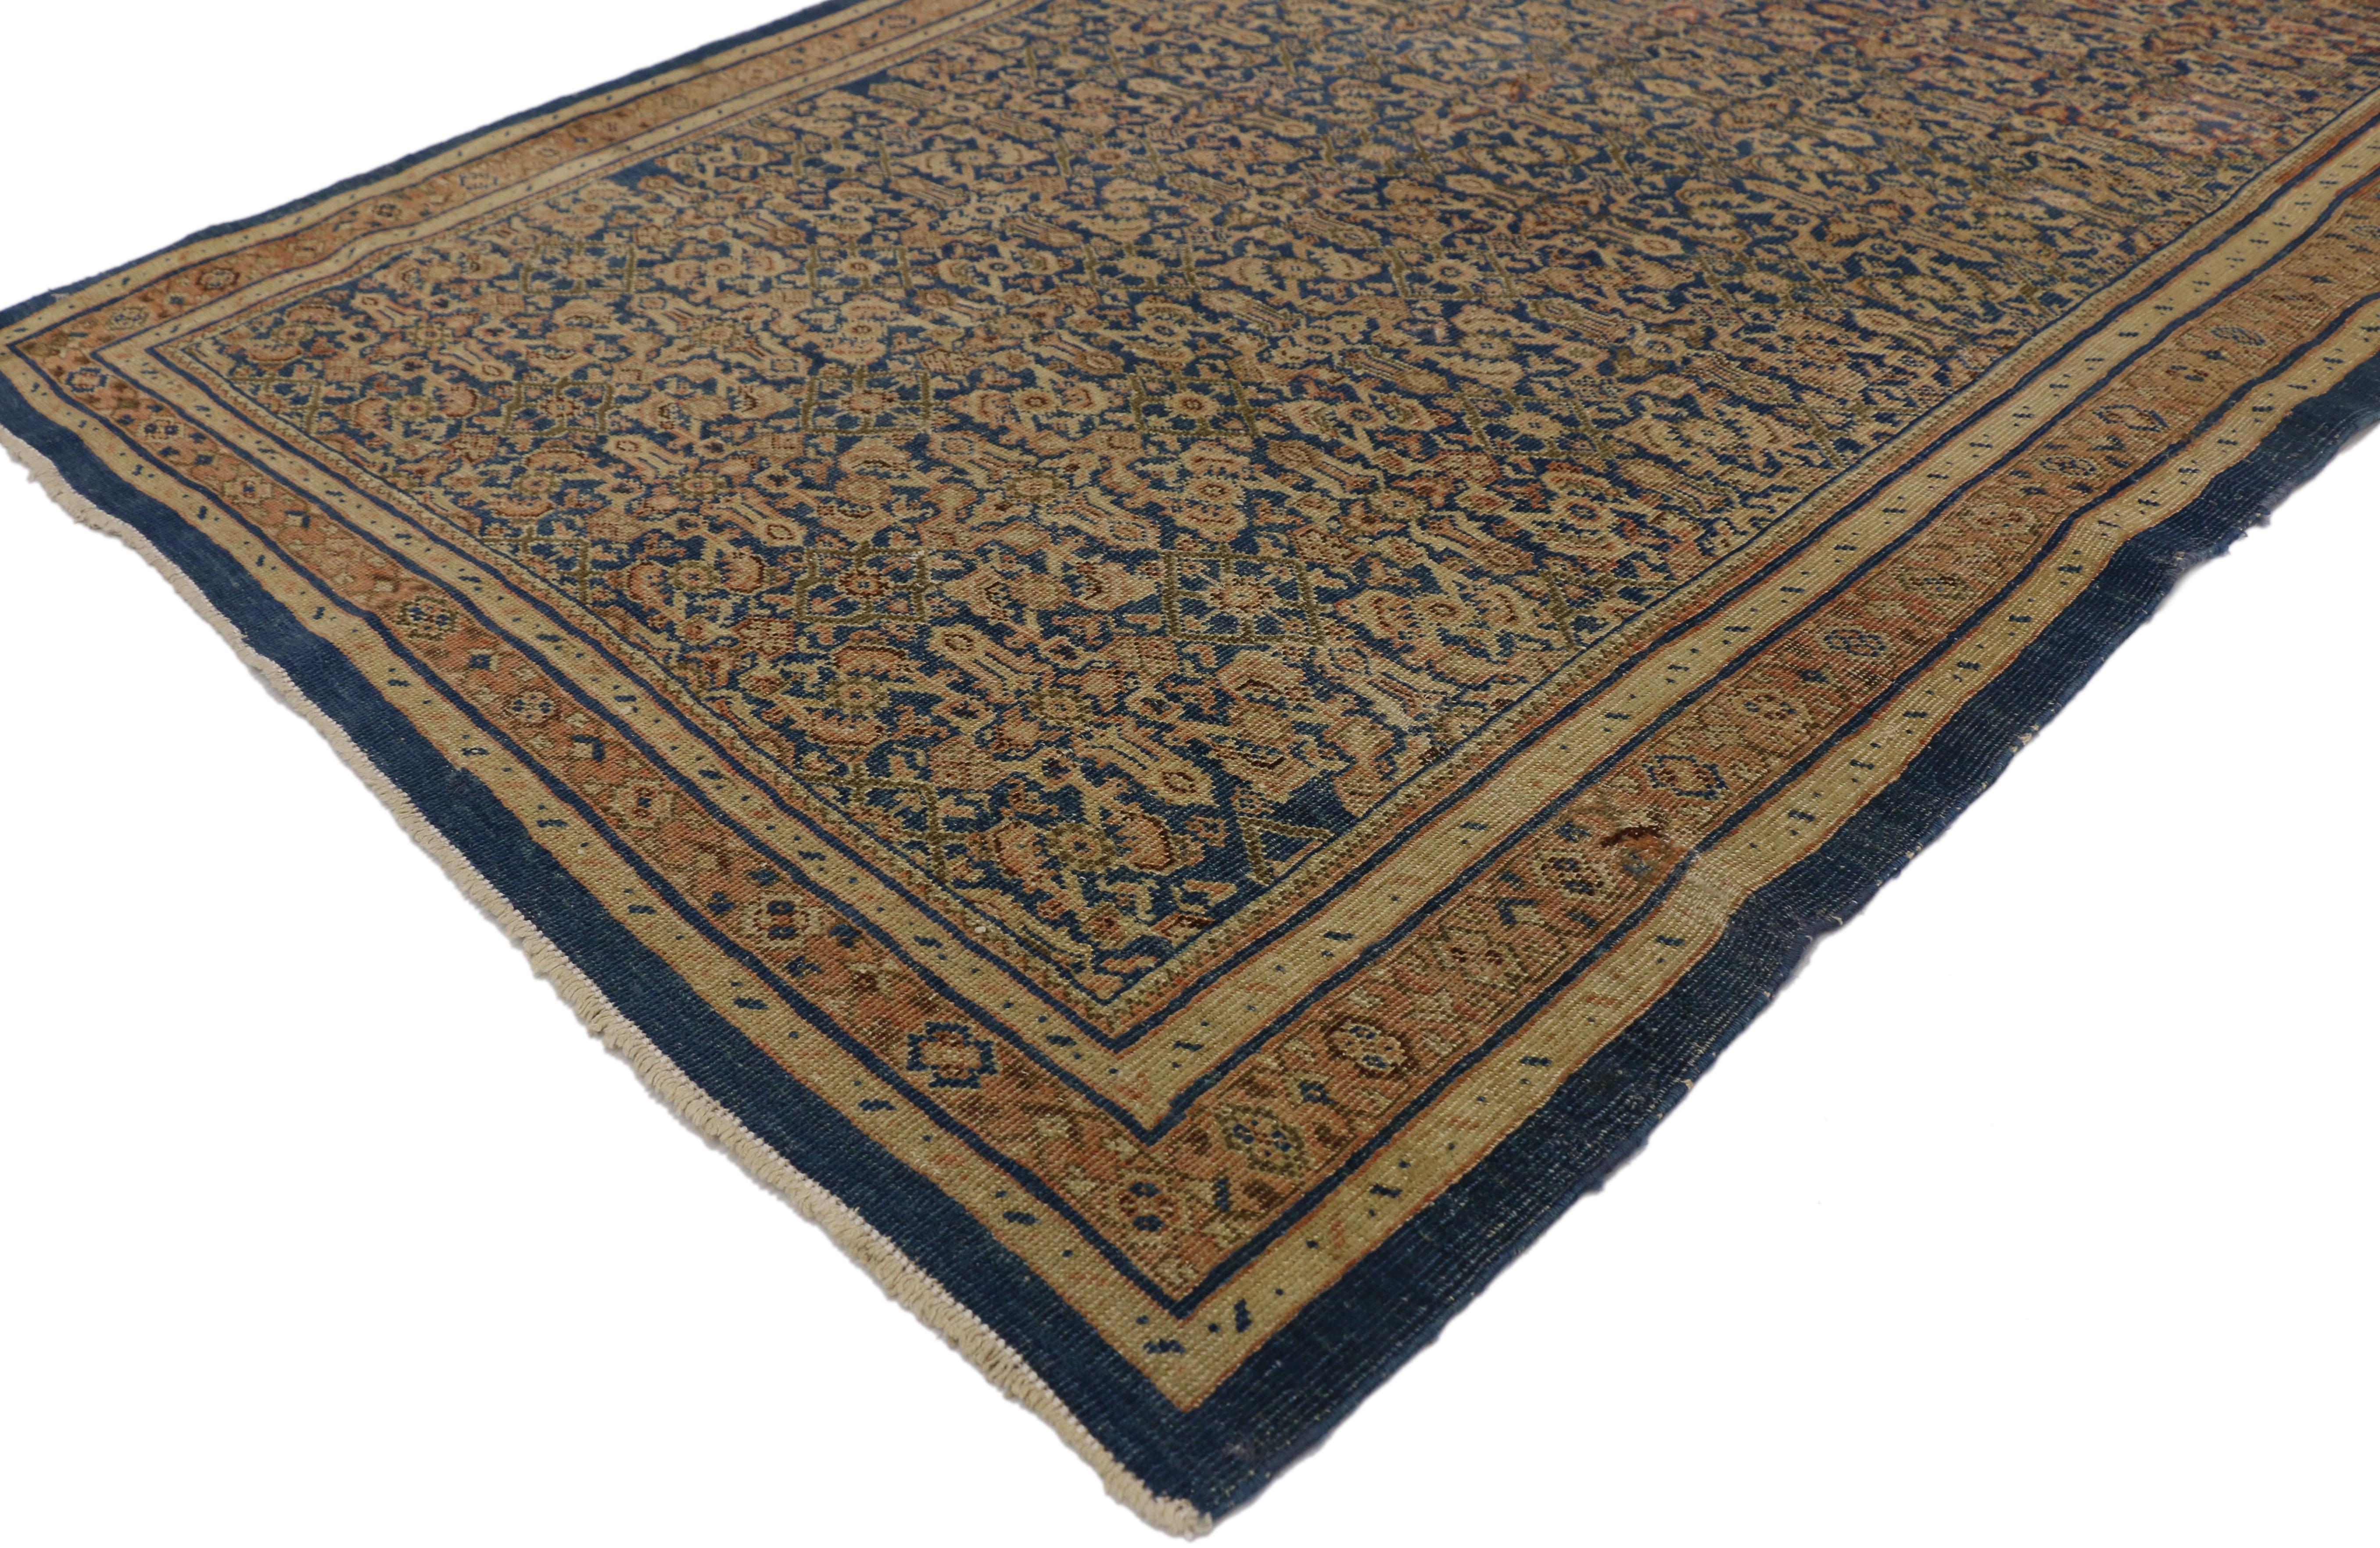 ?73088 Late 19th Century Antique Persian Mahal Ziegler Sultanabad rug with Modern Rustic Italian Cottage style 04'04 x 06'05. Displaying deep blues and warm earth-tone colors inspired by Italy combined with cozy simplicity, this hand-knotted wool